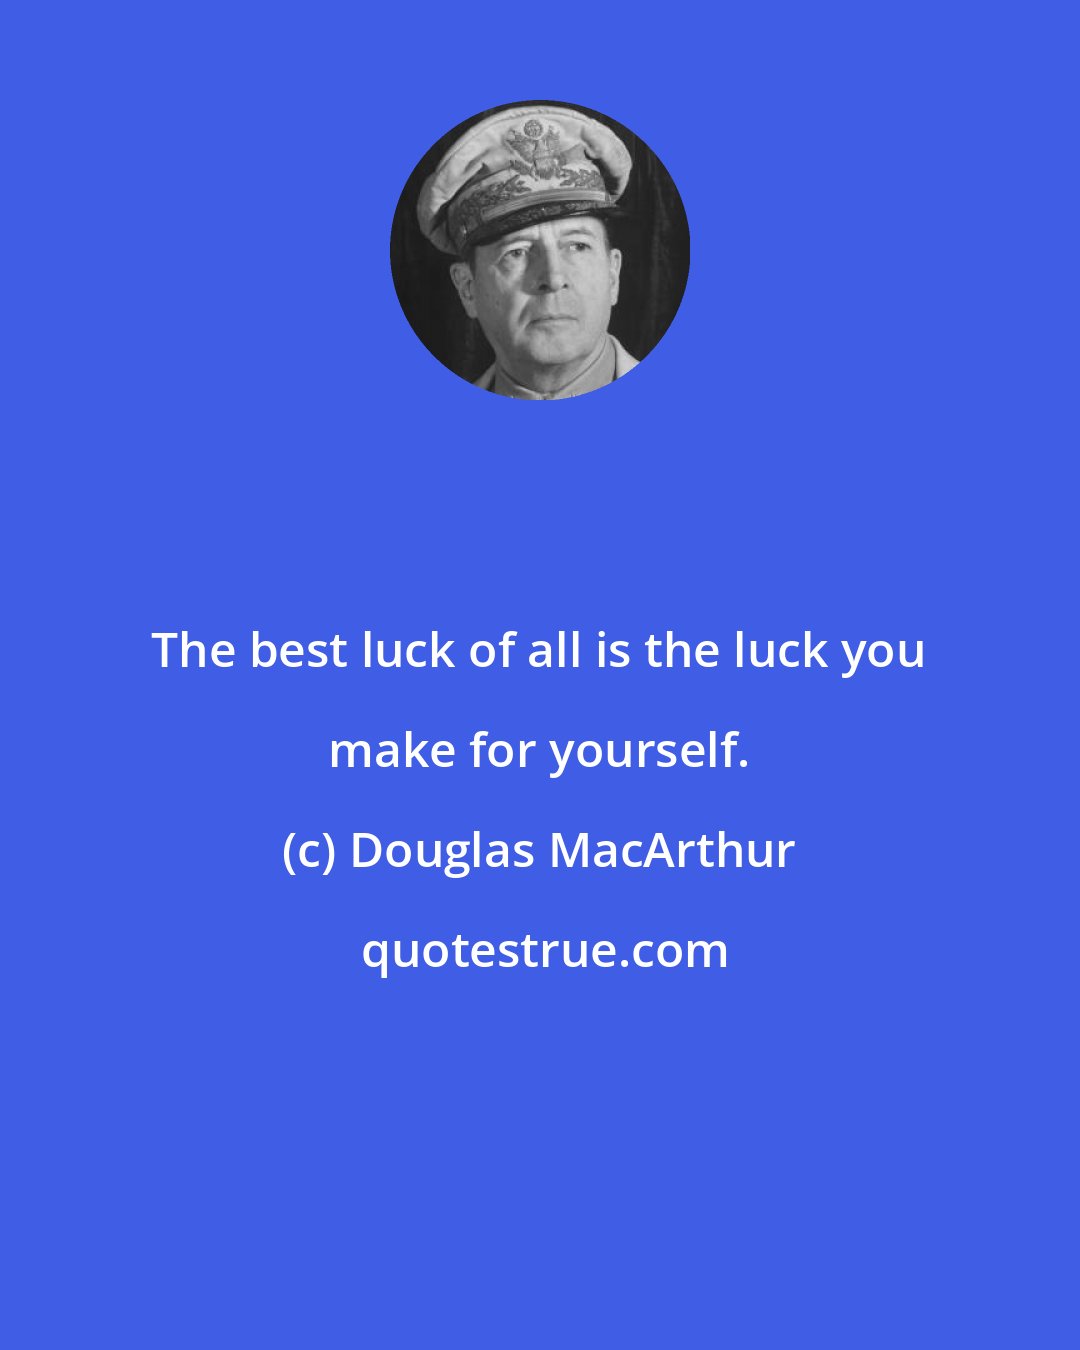 Douglas MacArthur: The best luck of all is the luck you make for yourself.